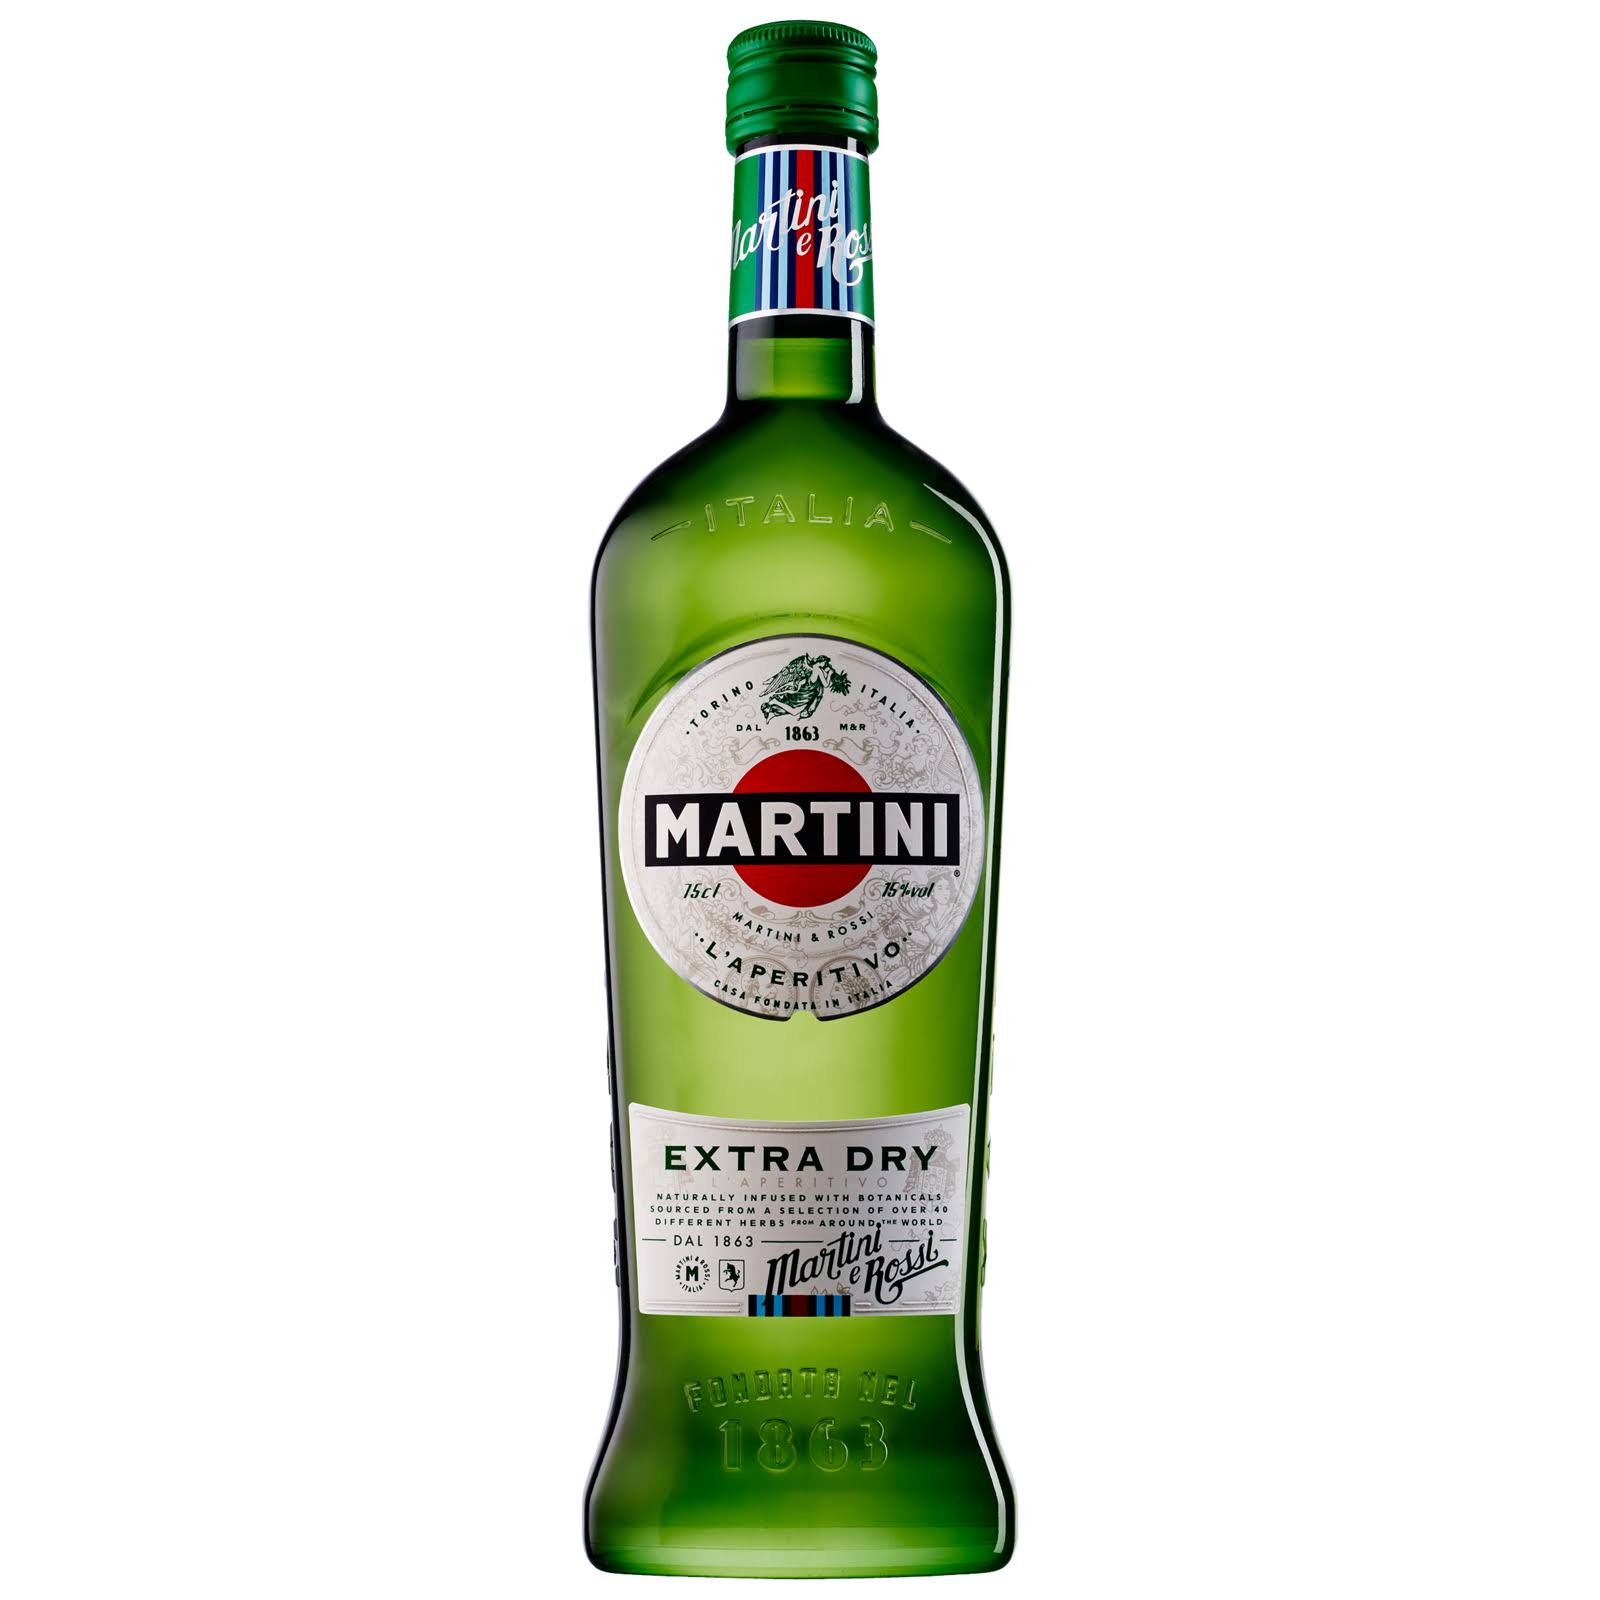 Martini Rossi Extra Dry Vermouth